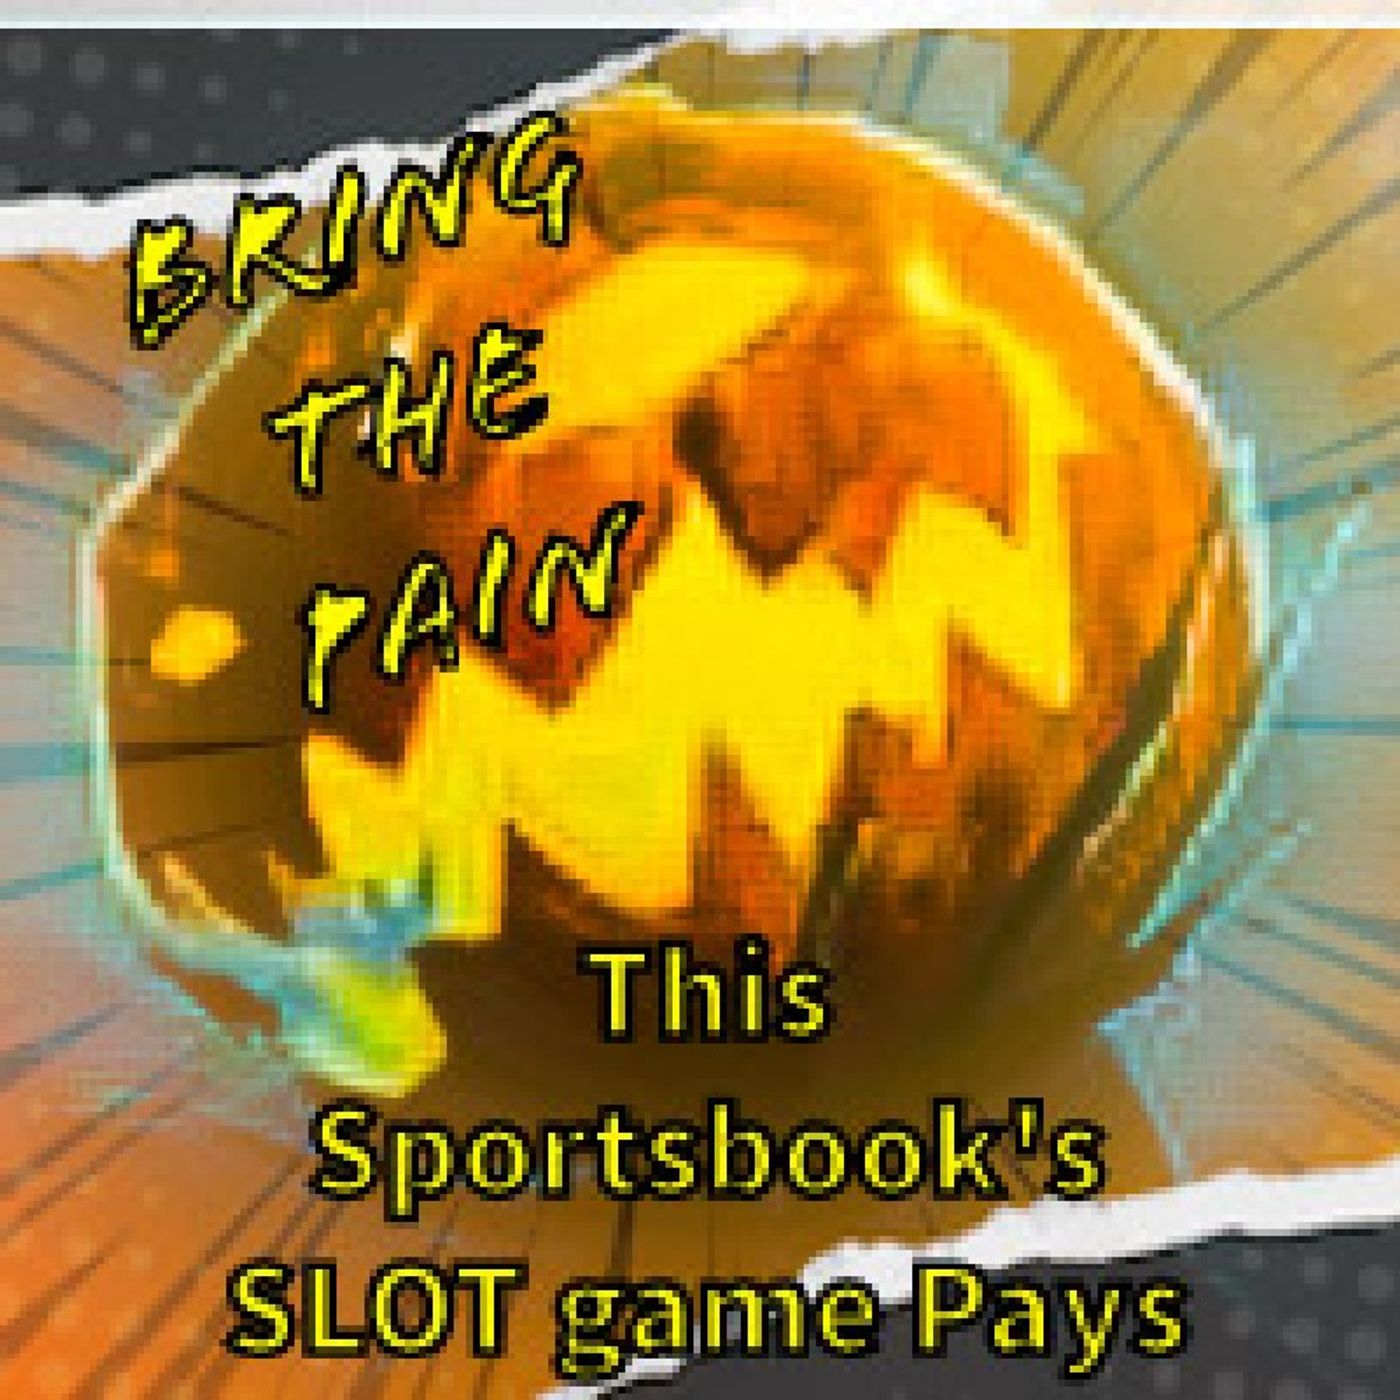 This Sportbook's Slot Game Pays